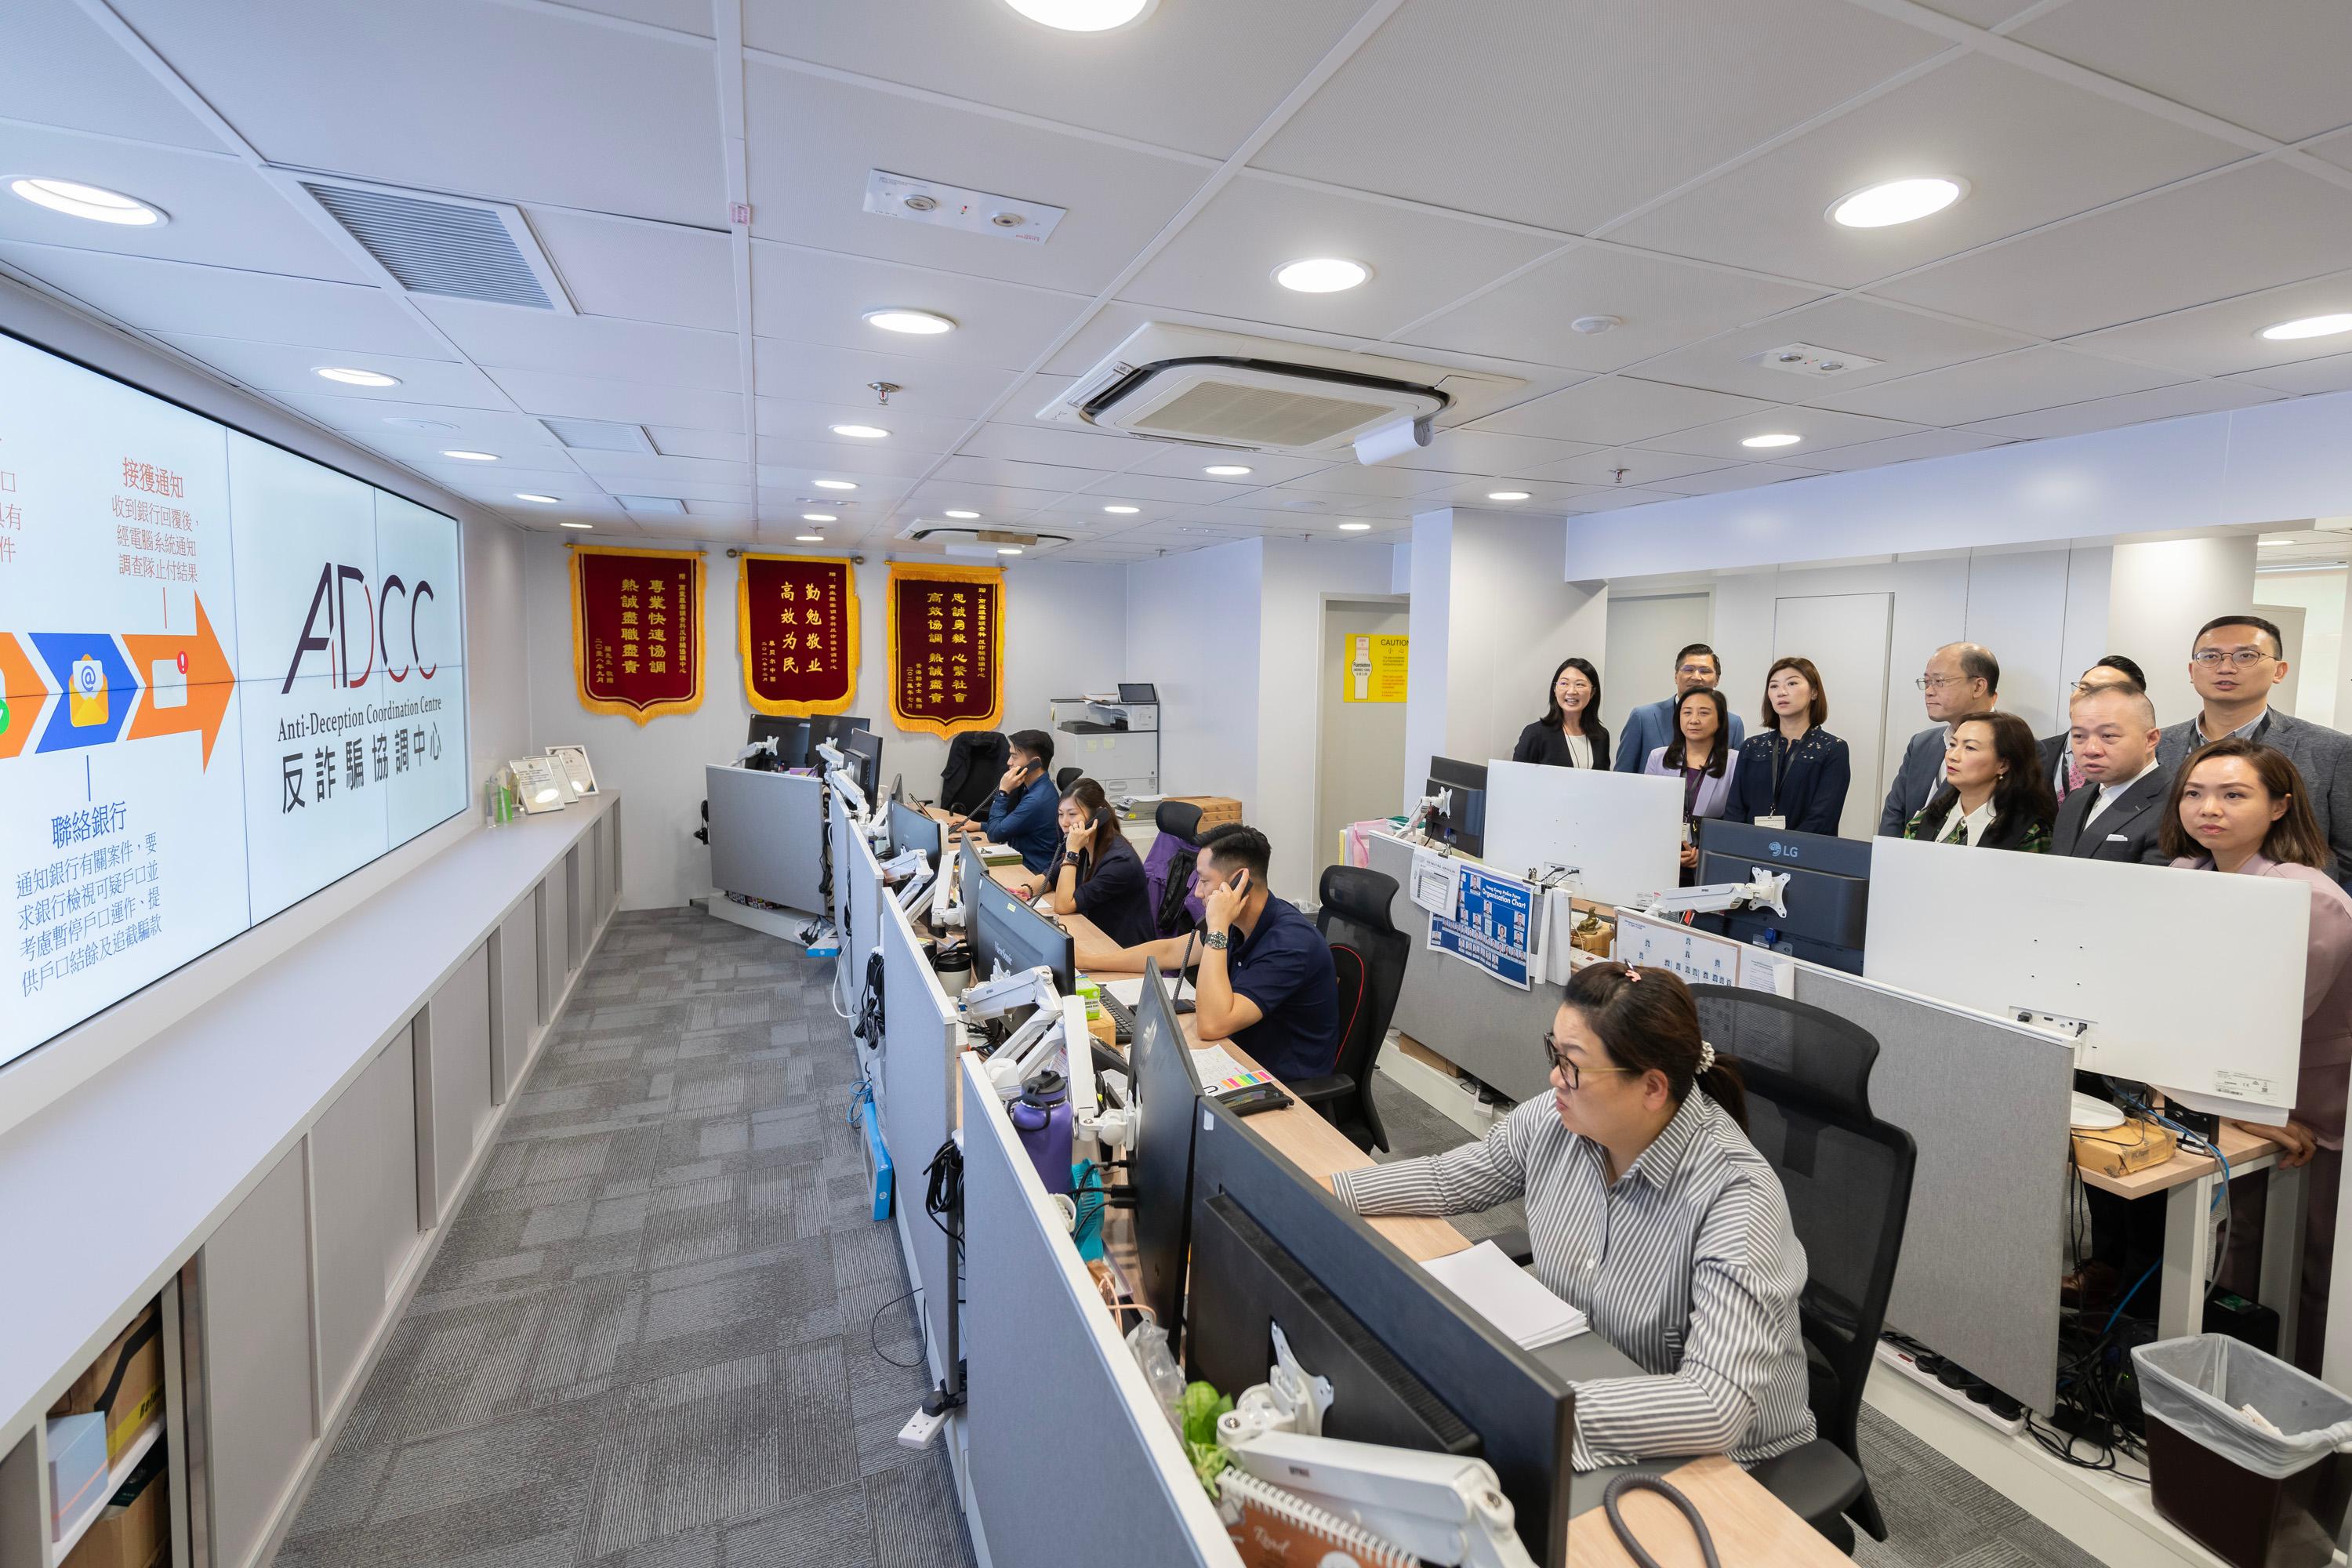 The Legislative Council (LegCo) Panel on Security visits the Anti-Deception Coordination Centre (ADCC) and the Anti-Deception Alliance of the Hong Kong Police Force today (April 23). Photo shows LegCo Members observing the workflows of ADCC Call Centre.